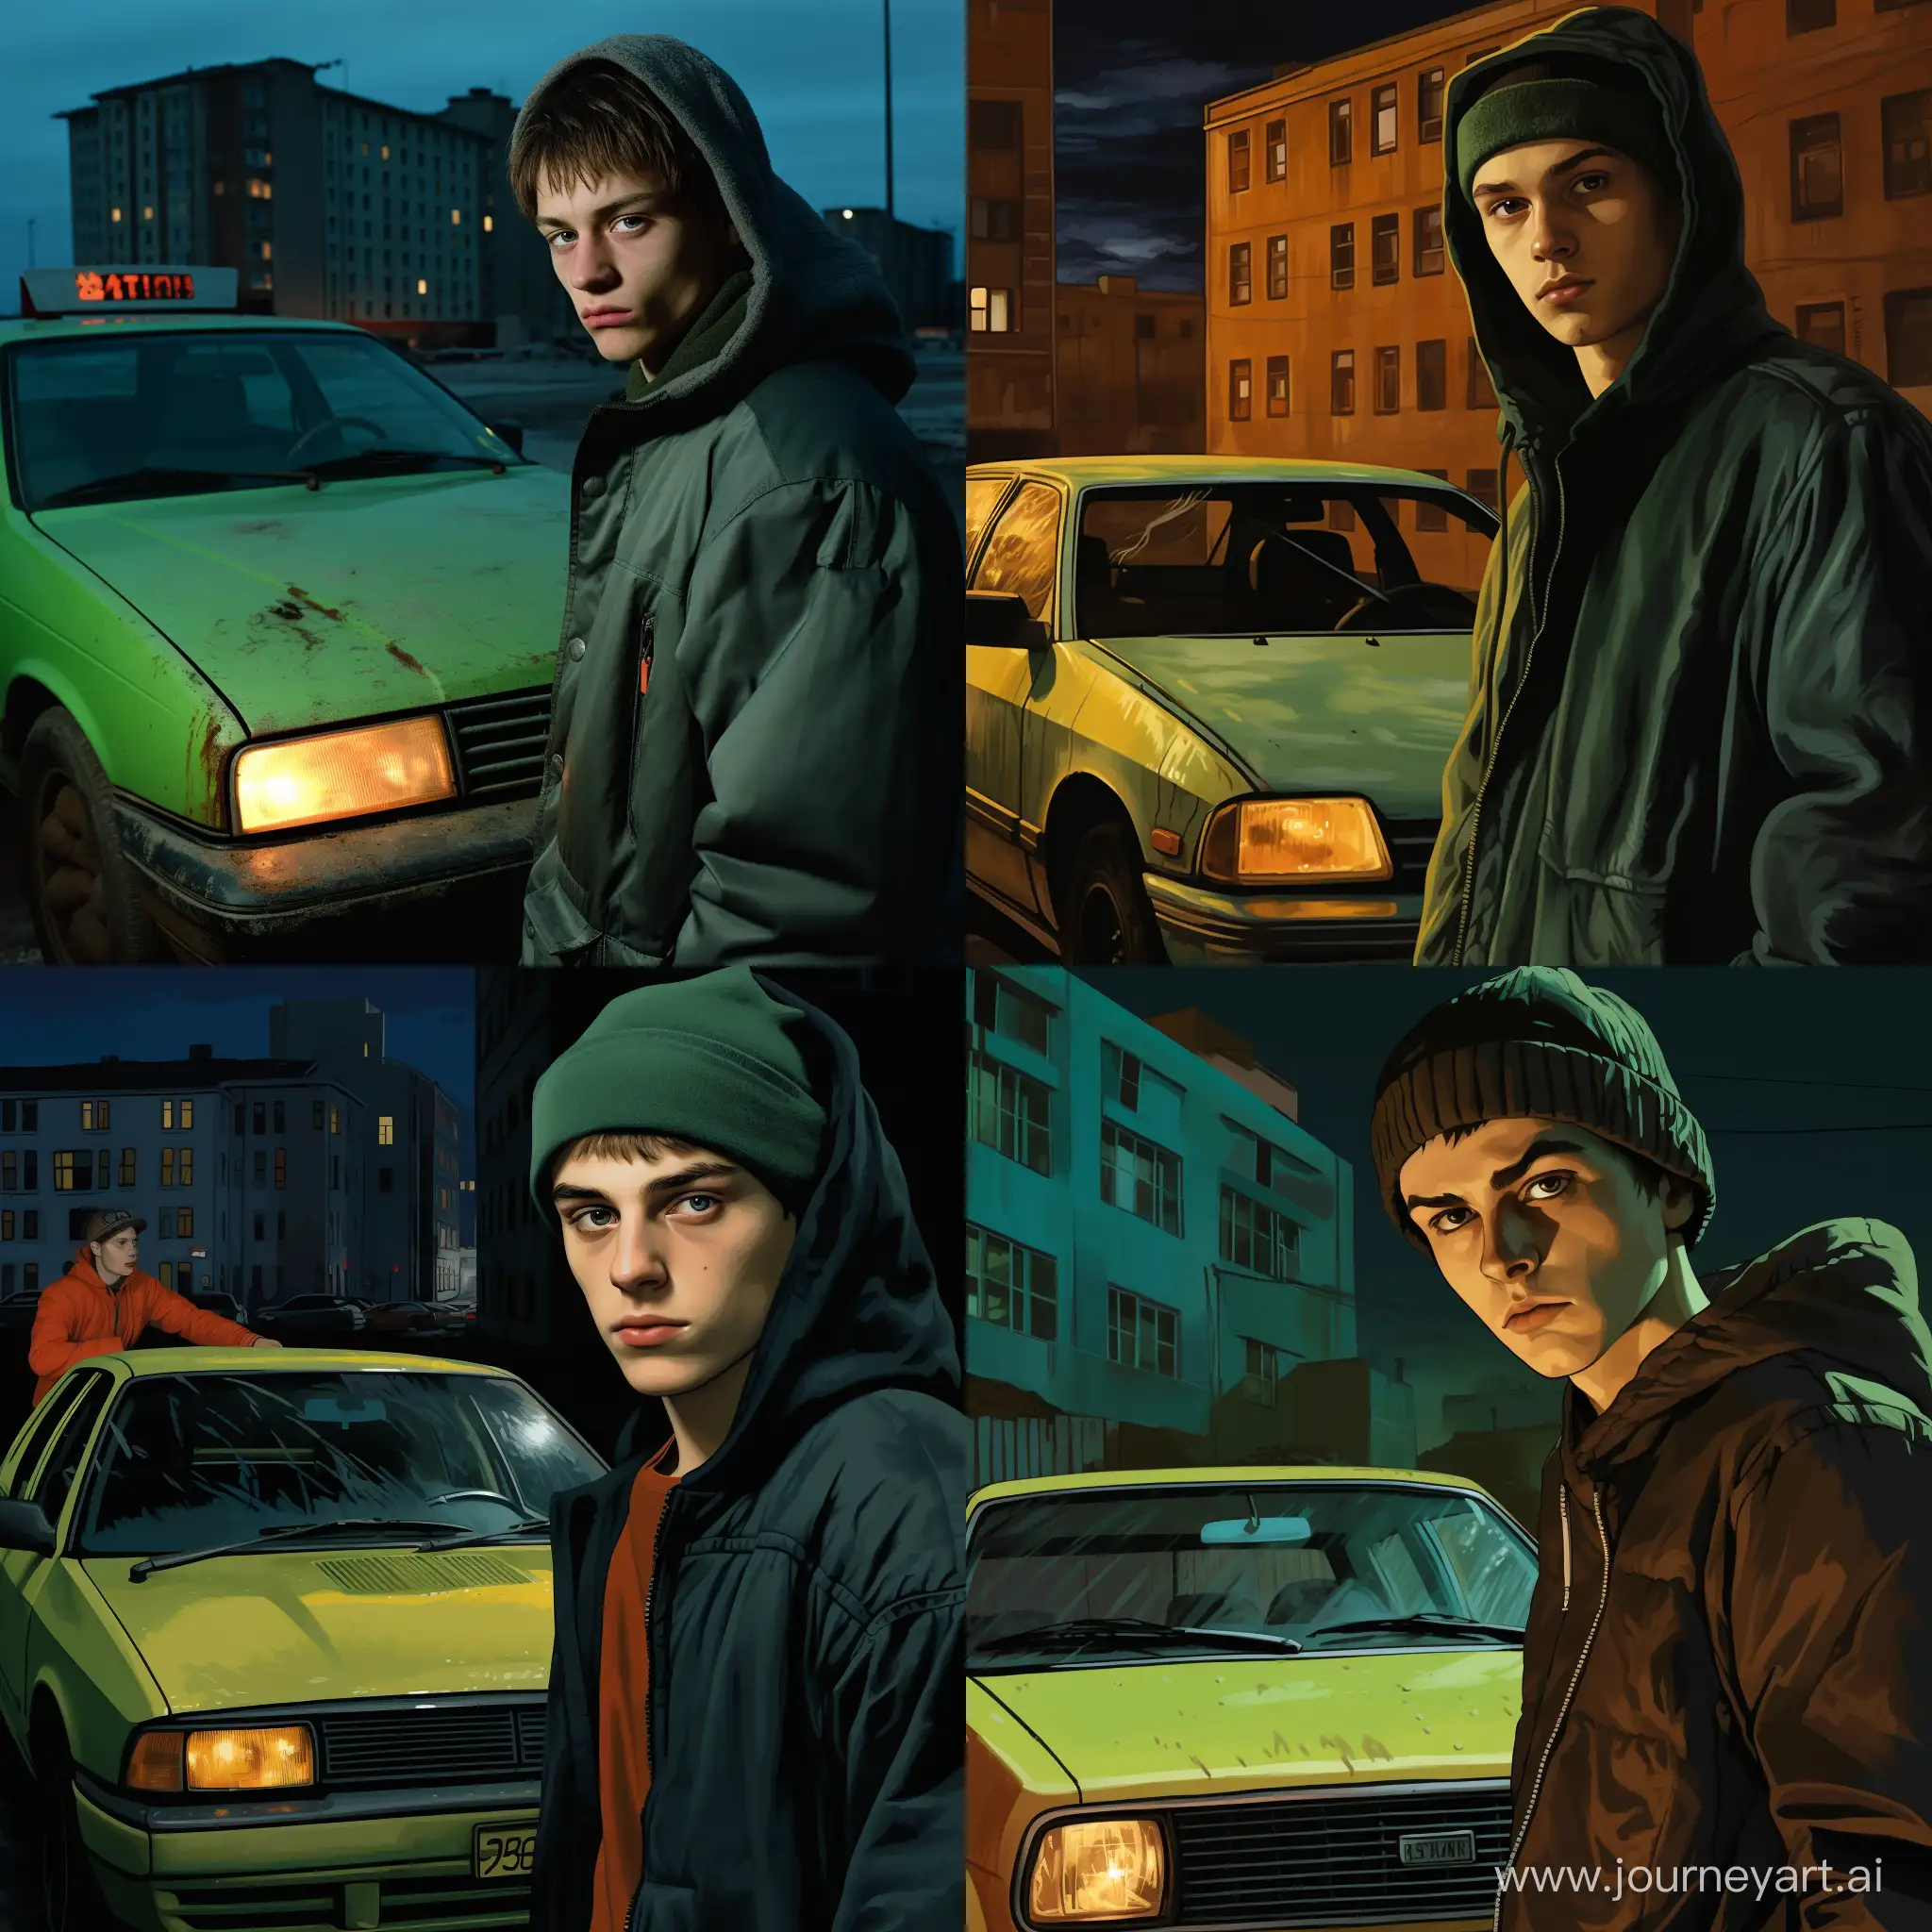 A gay teenager weared in green hoodie is standing next to his old 2003 used liftback sedan in a black-green colour. The yellow halogen headlights of this sedan shine brightly. The action takes place on a dark street in a eastern european city in prefab dirty post soviet 16 storey building